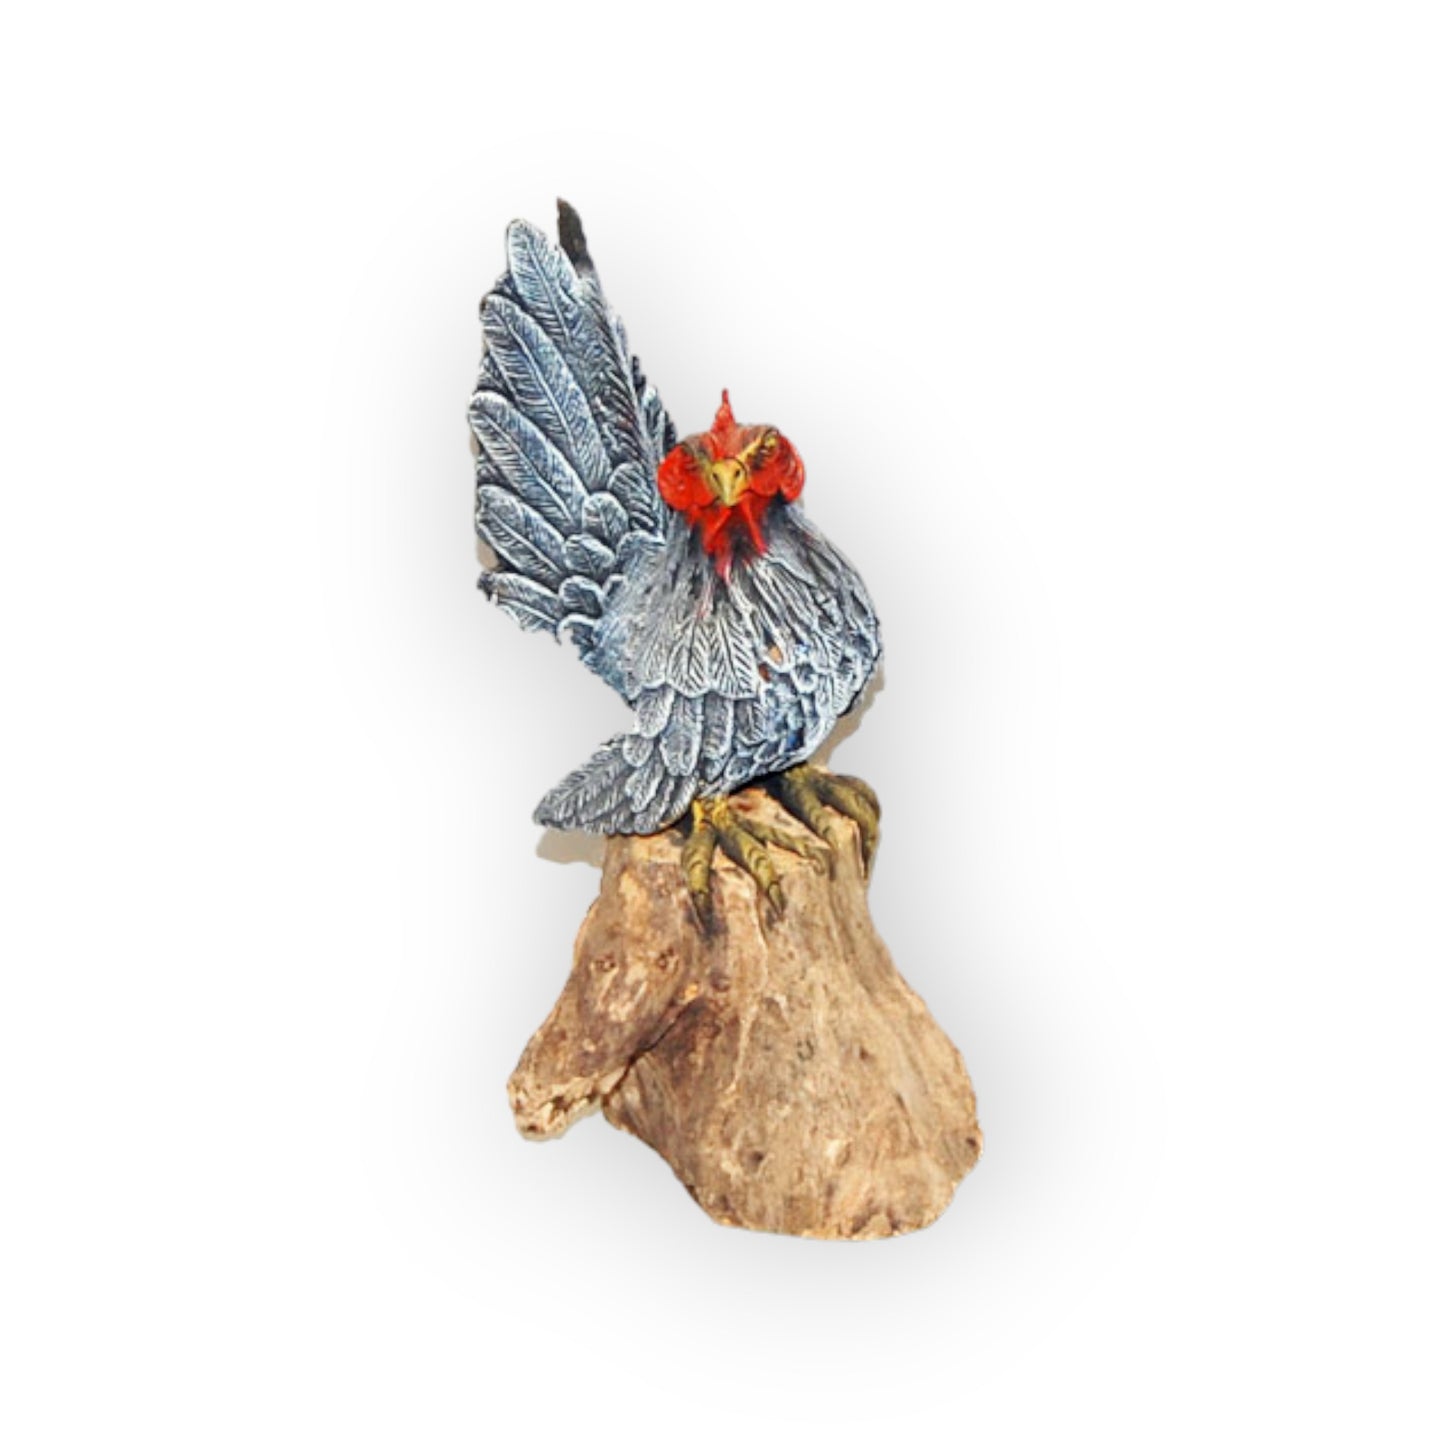 Synthetic Likeness of a Rooster on Log 10" Tall